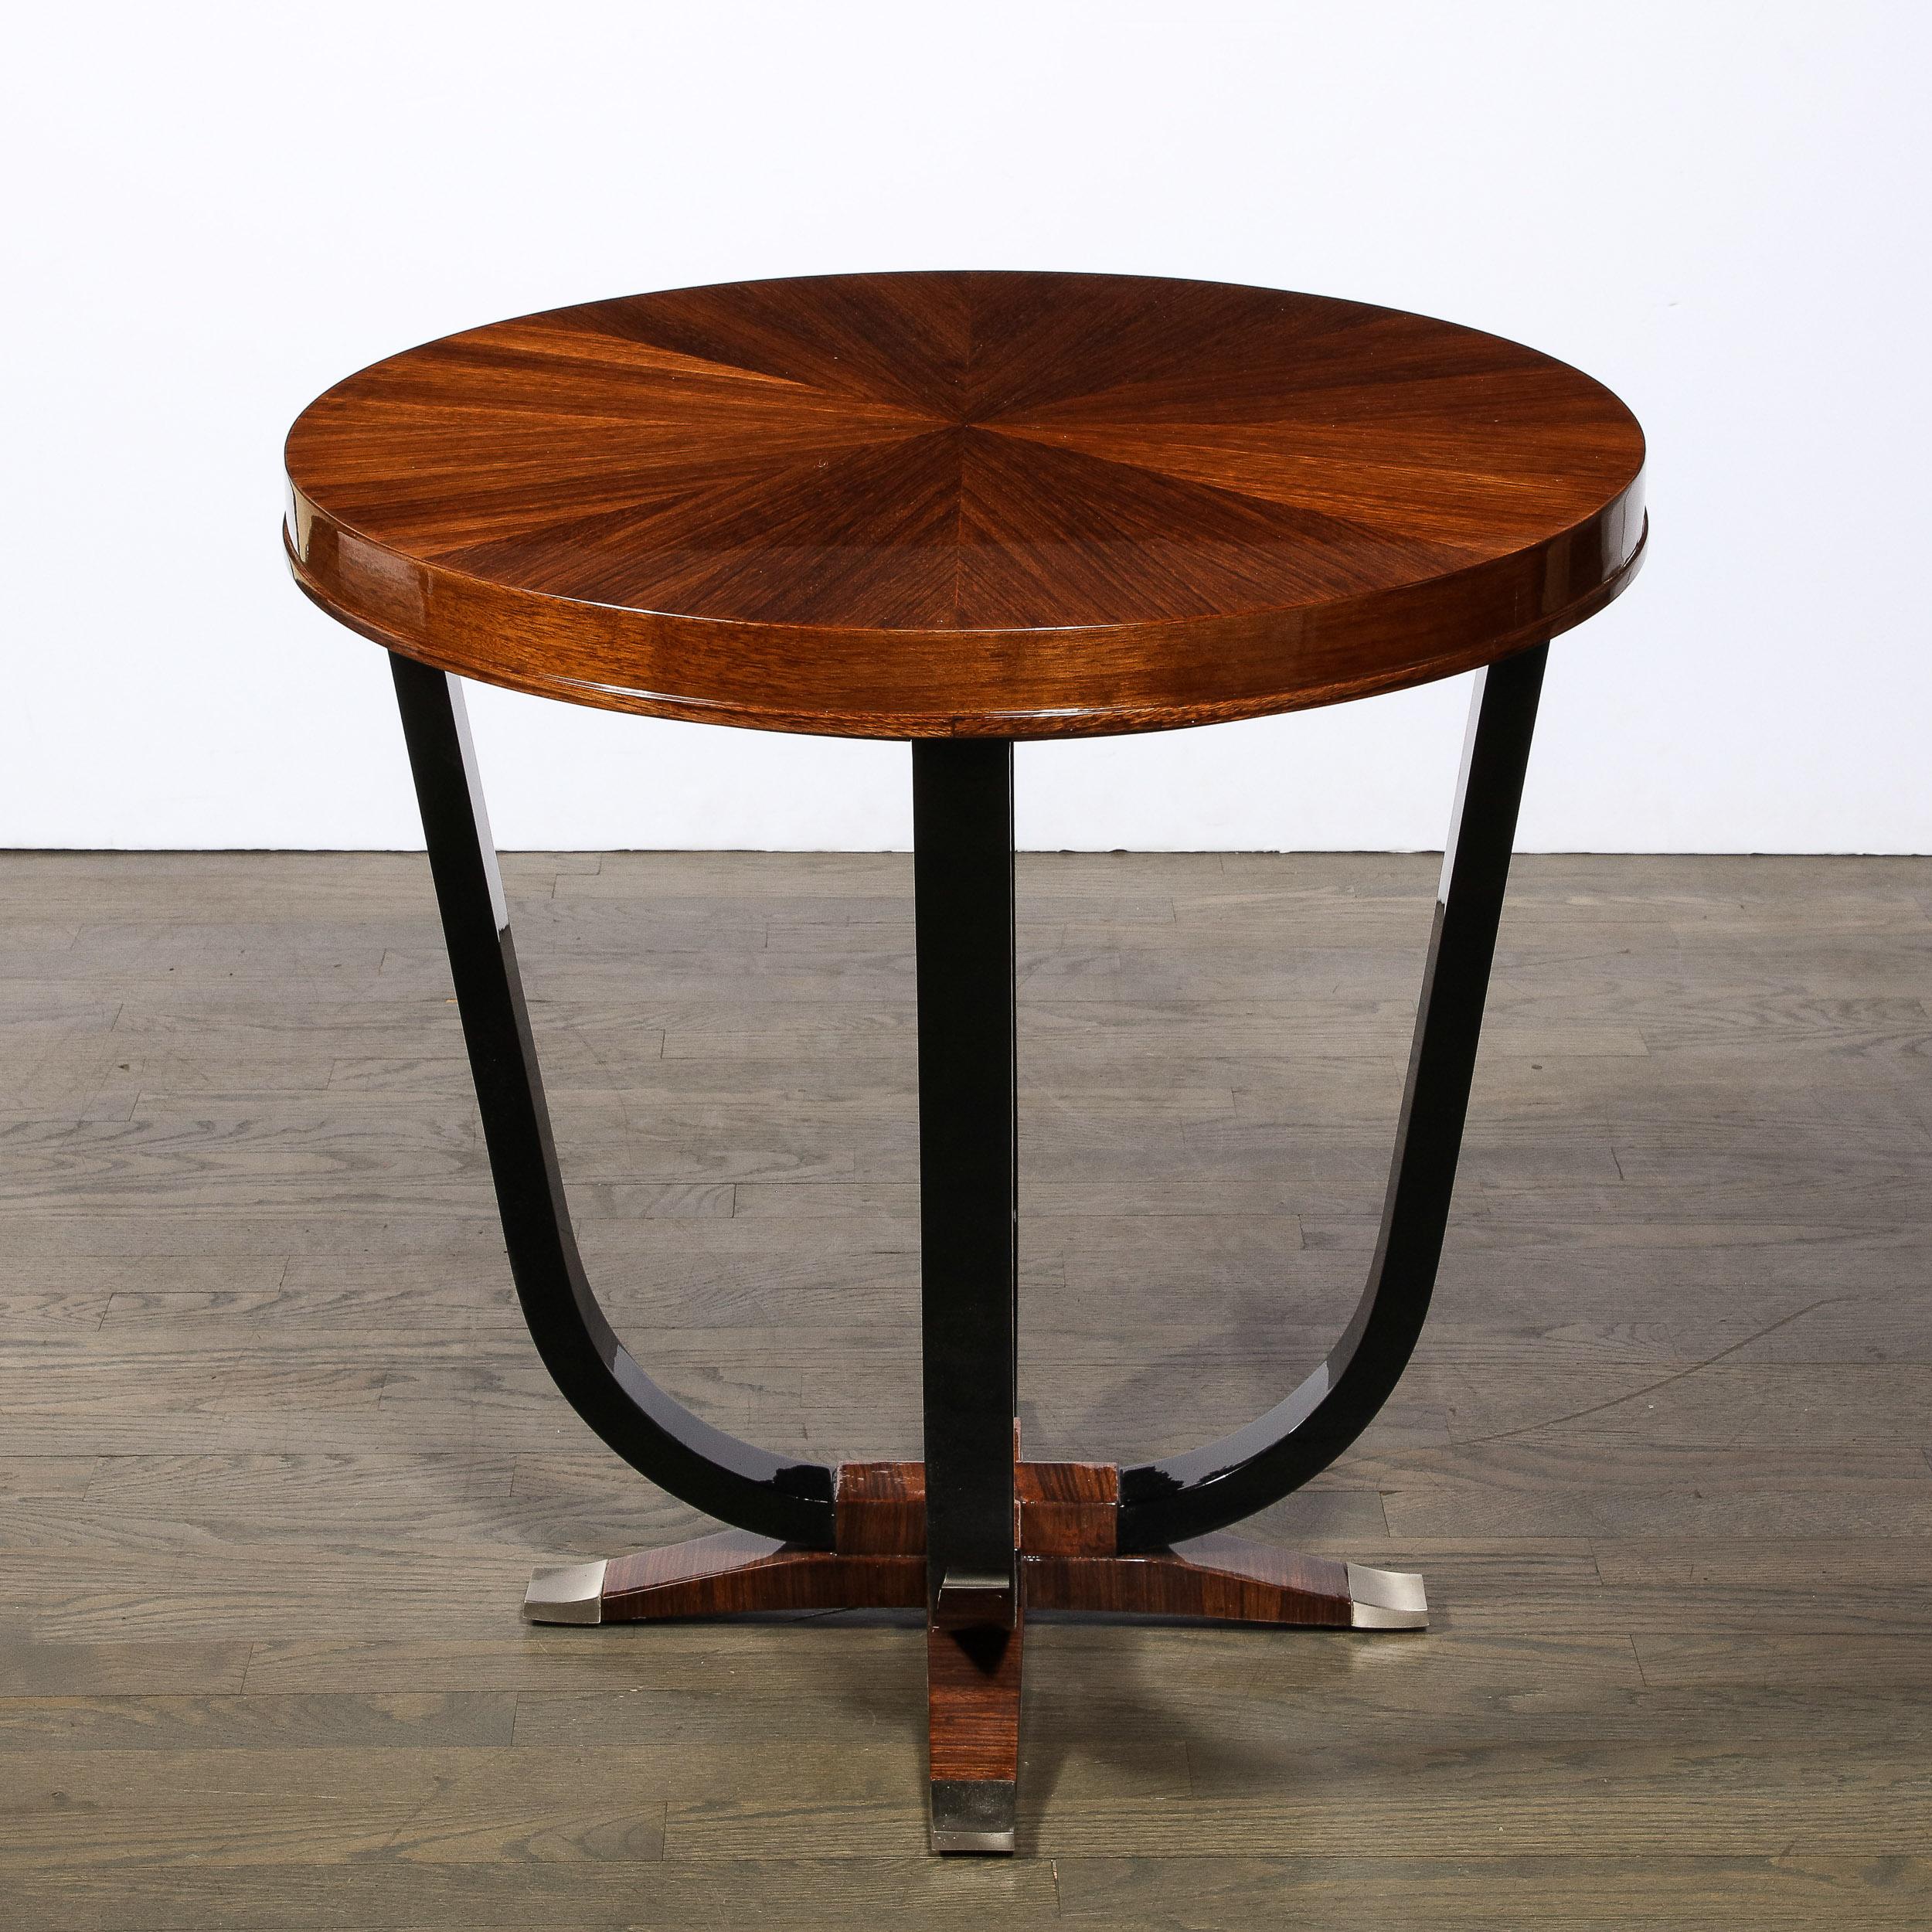 French Art Deco Gueridon Table in Book-Matched Walnut, Lacquered Legs & Nickel Sabots For Sale